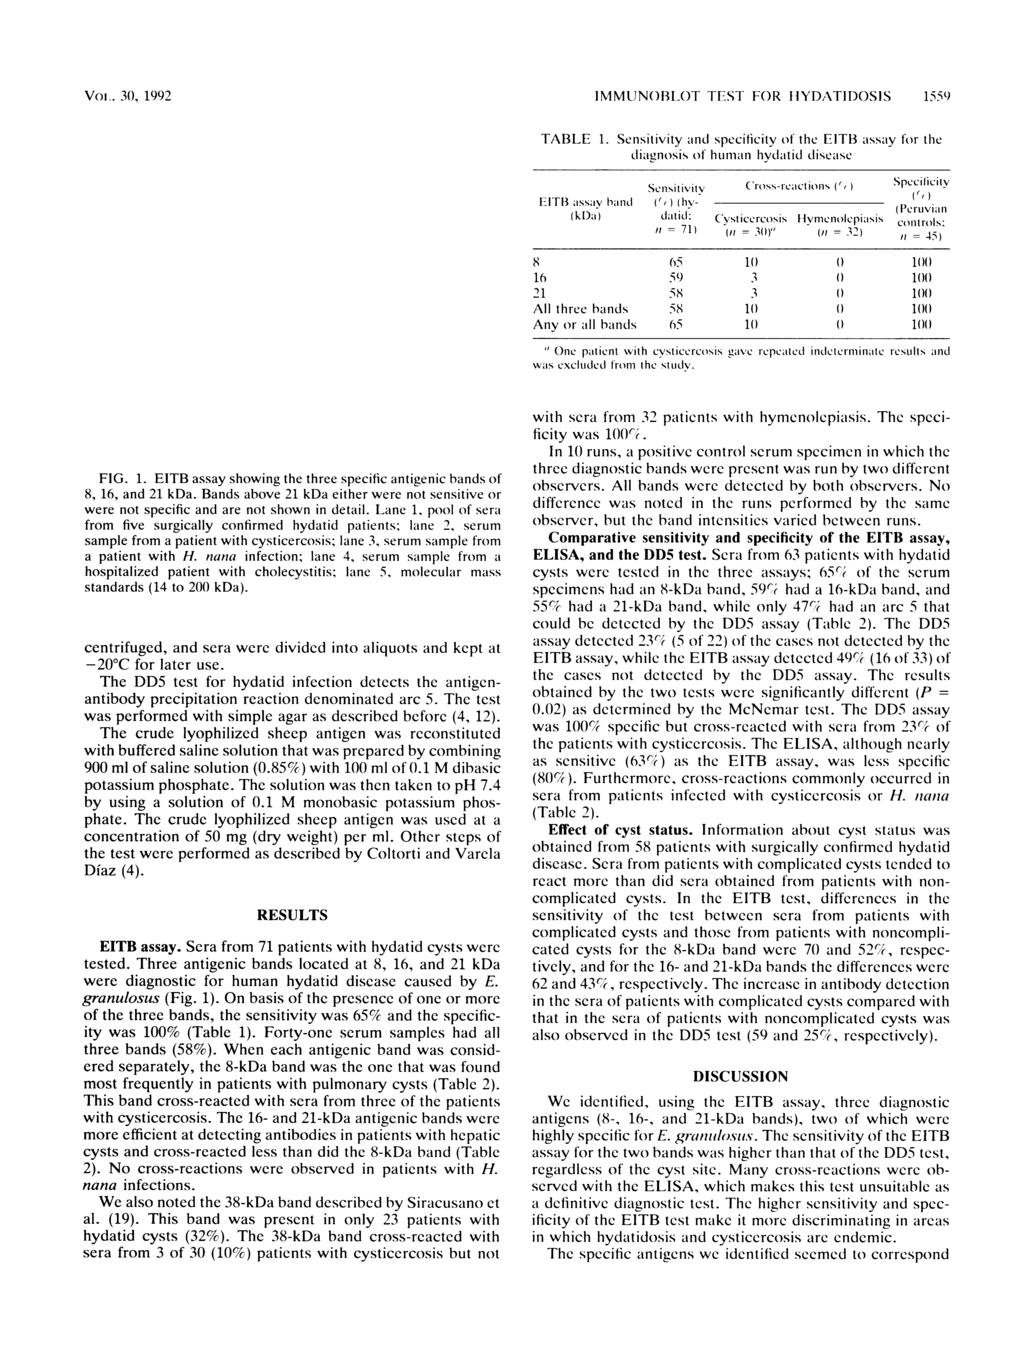 Voi- 3, 1992 21.) 1 6... 1 2 3 4 5-2 - 97.4-68 43-29 14.3 FIG. 1. EITB assay showing the three specific antigenic bands of 8, 16, and 21 kda.